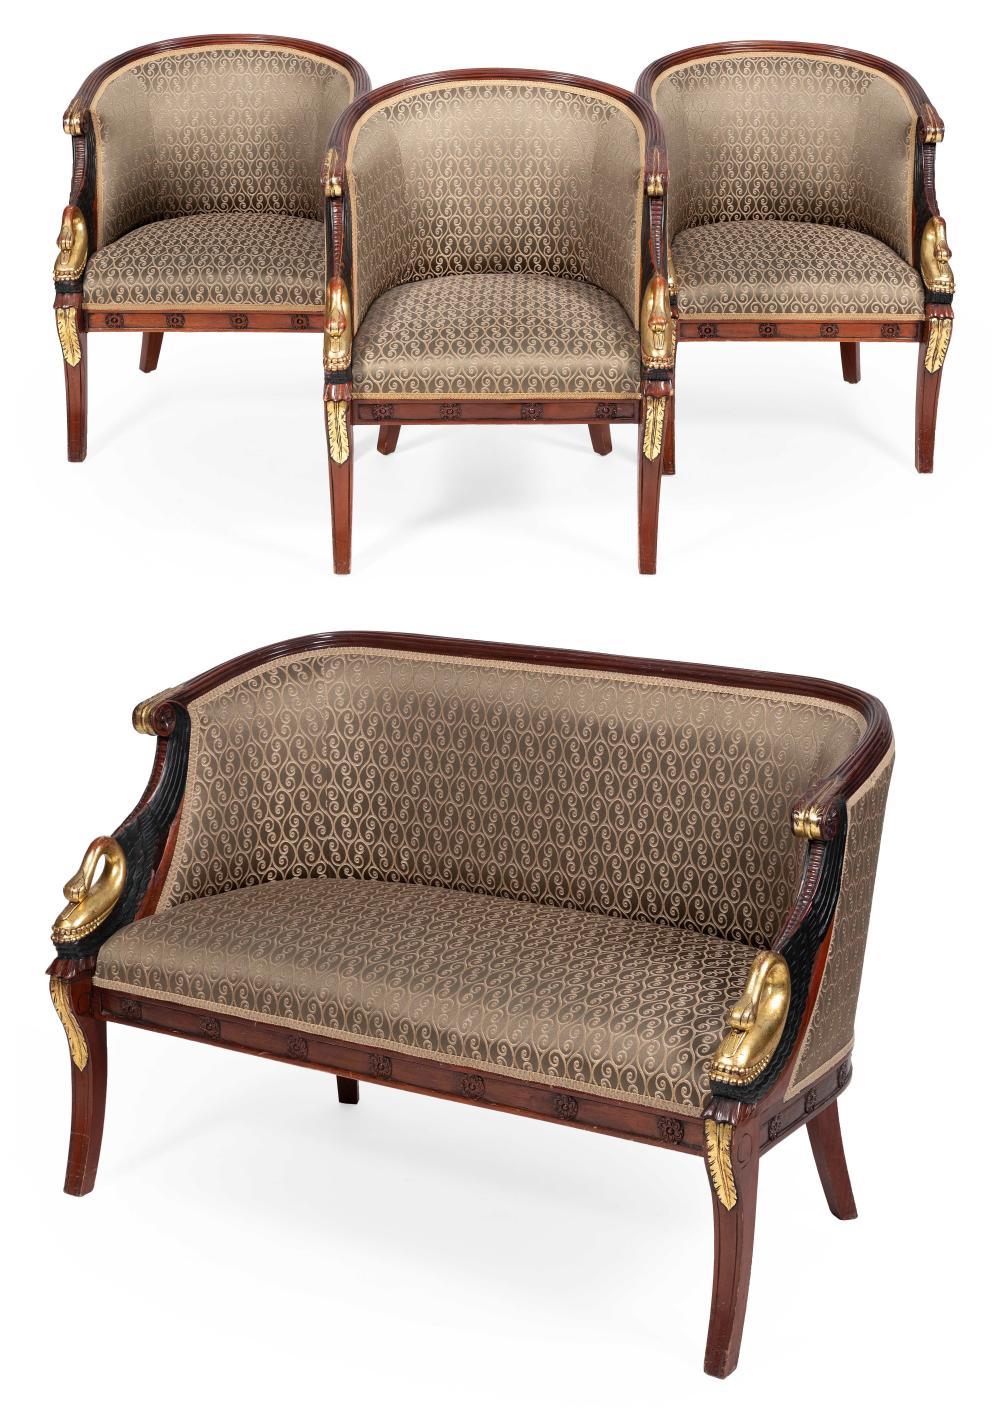 EMPIRE-STYLE SETTEE AND THREE CHAIRS